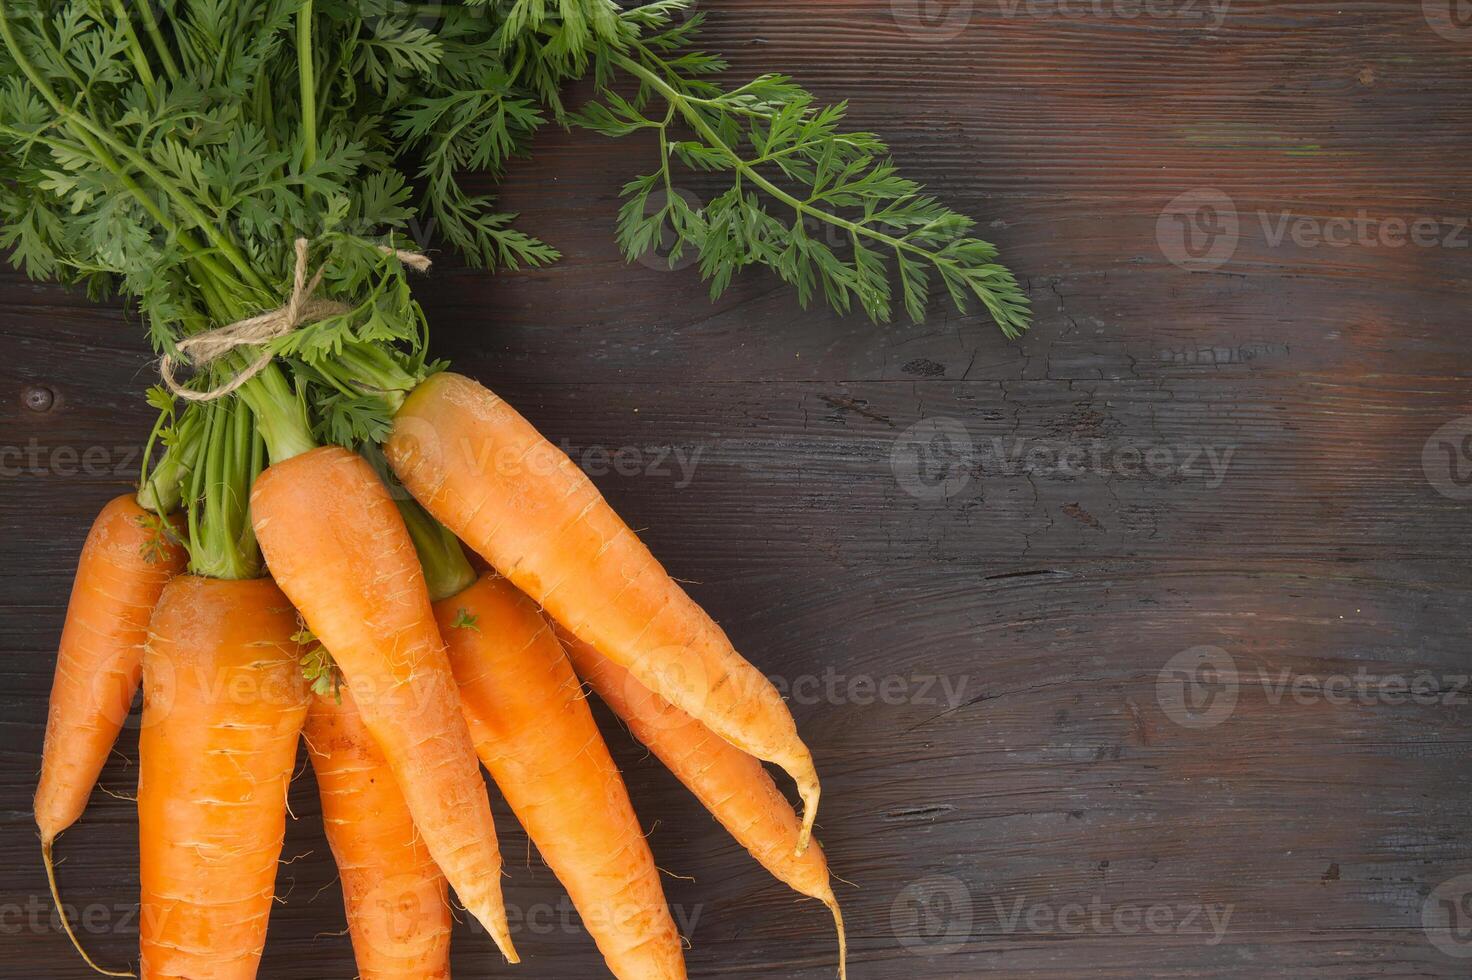 Bundle of fresh, orange carrots with green tops on wooden table photo